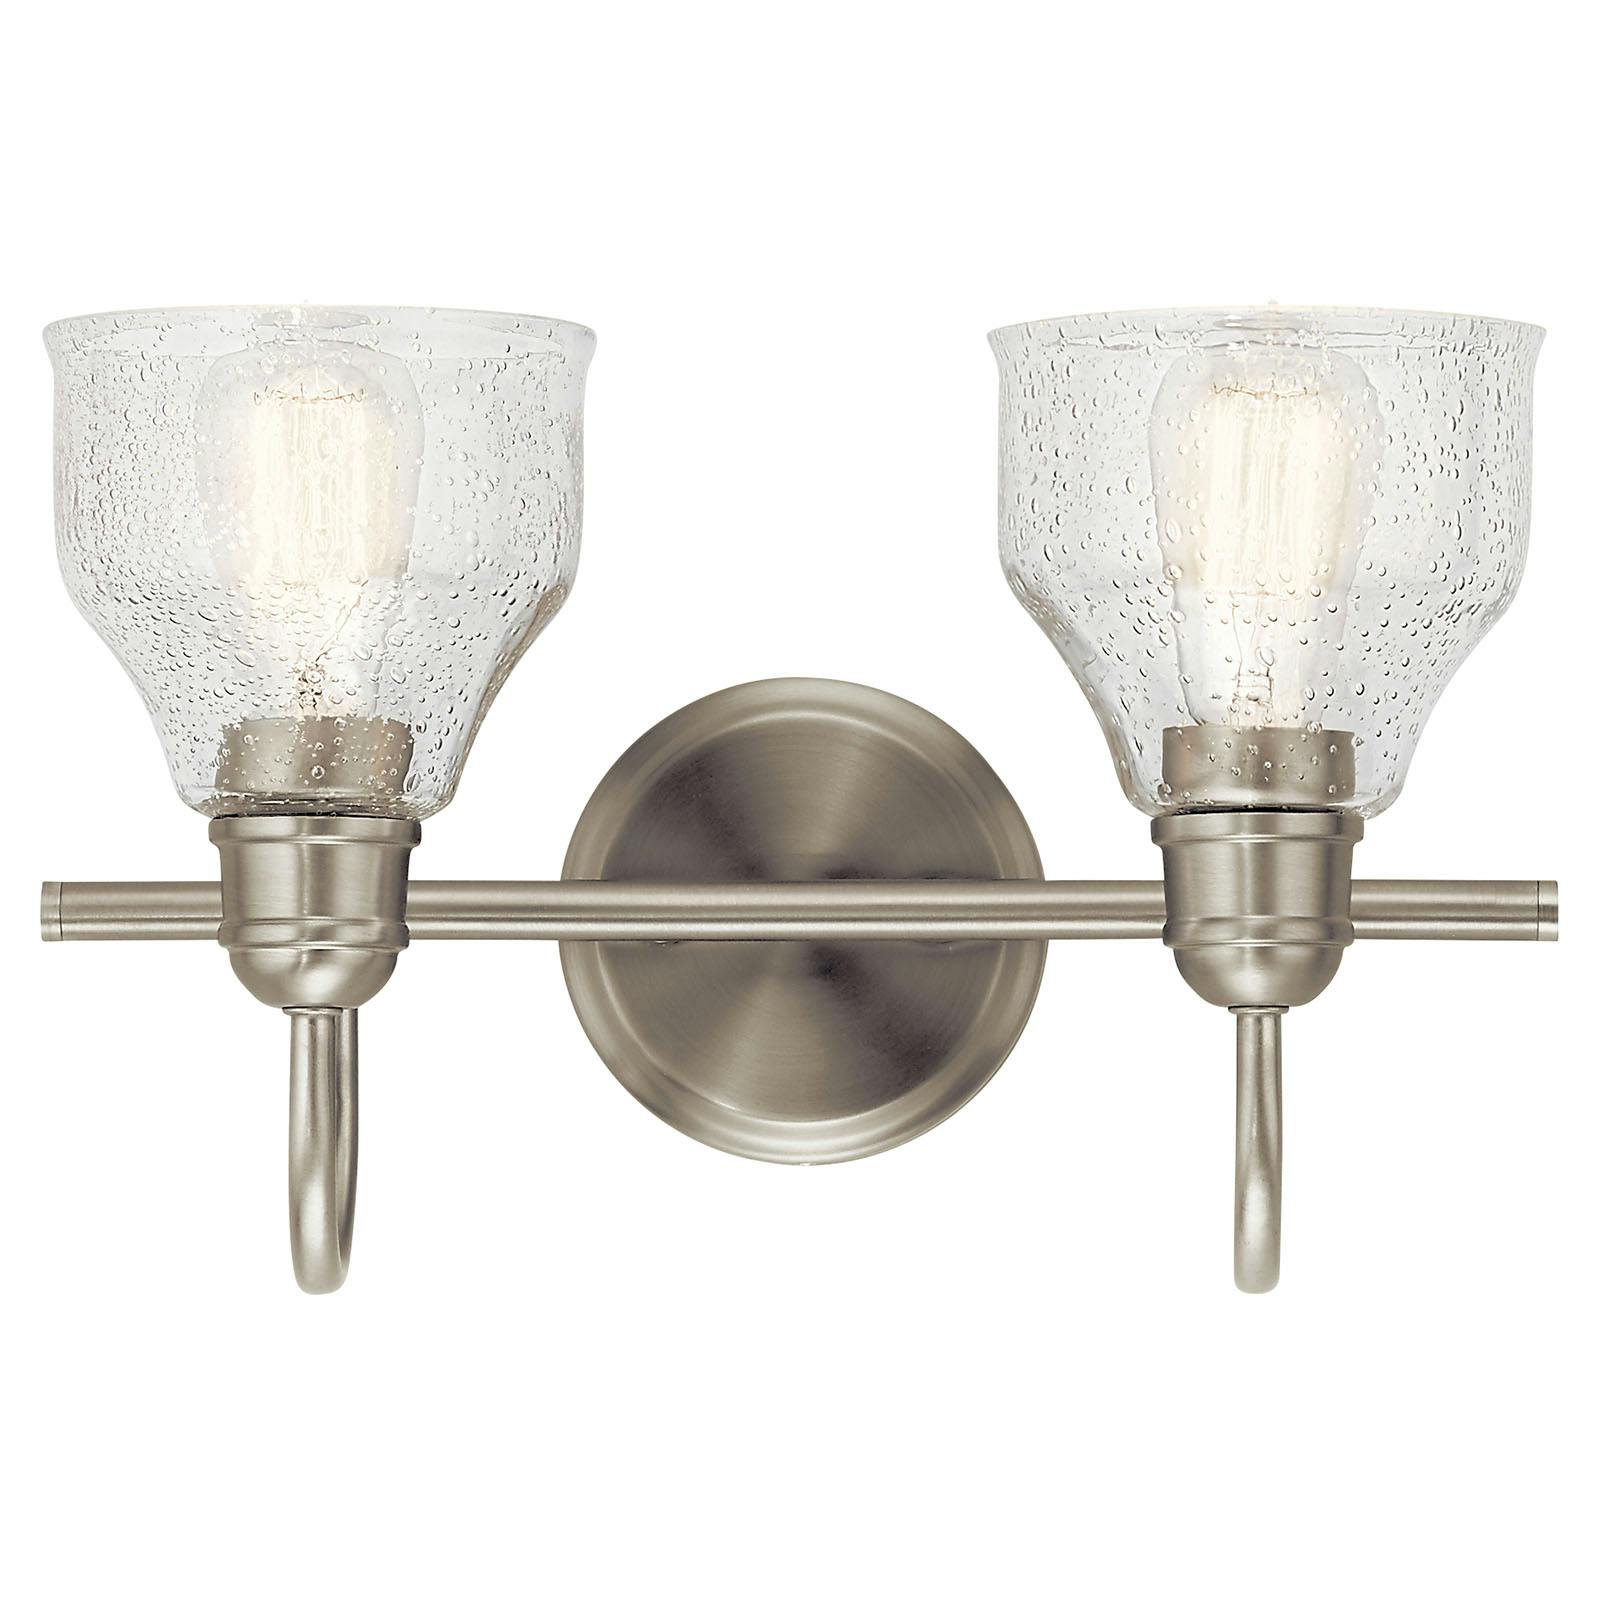 The Avery 2 Light Vanity Light Brushed Nickel facing up on a white background